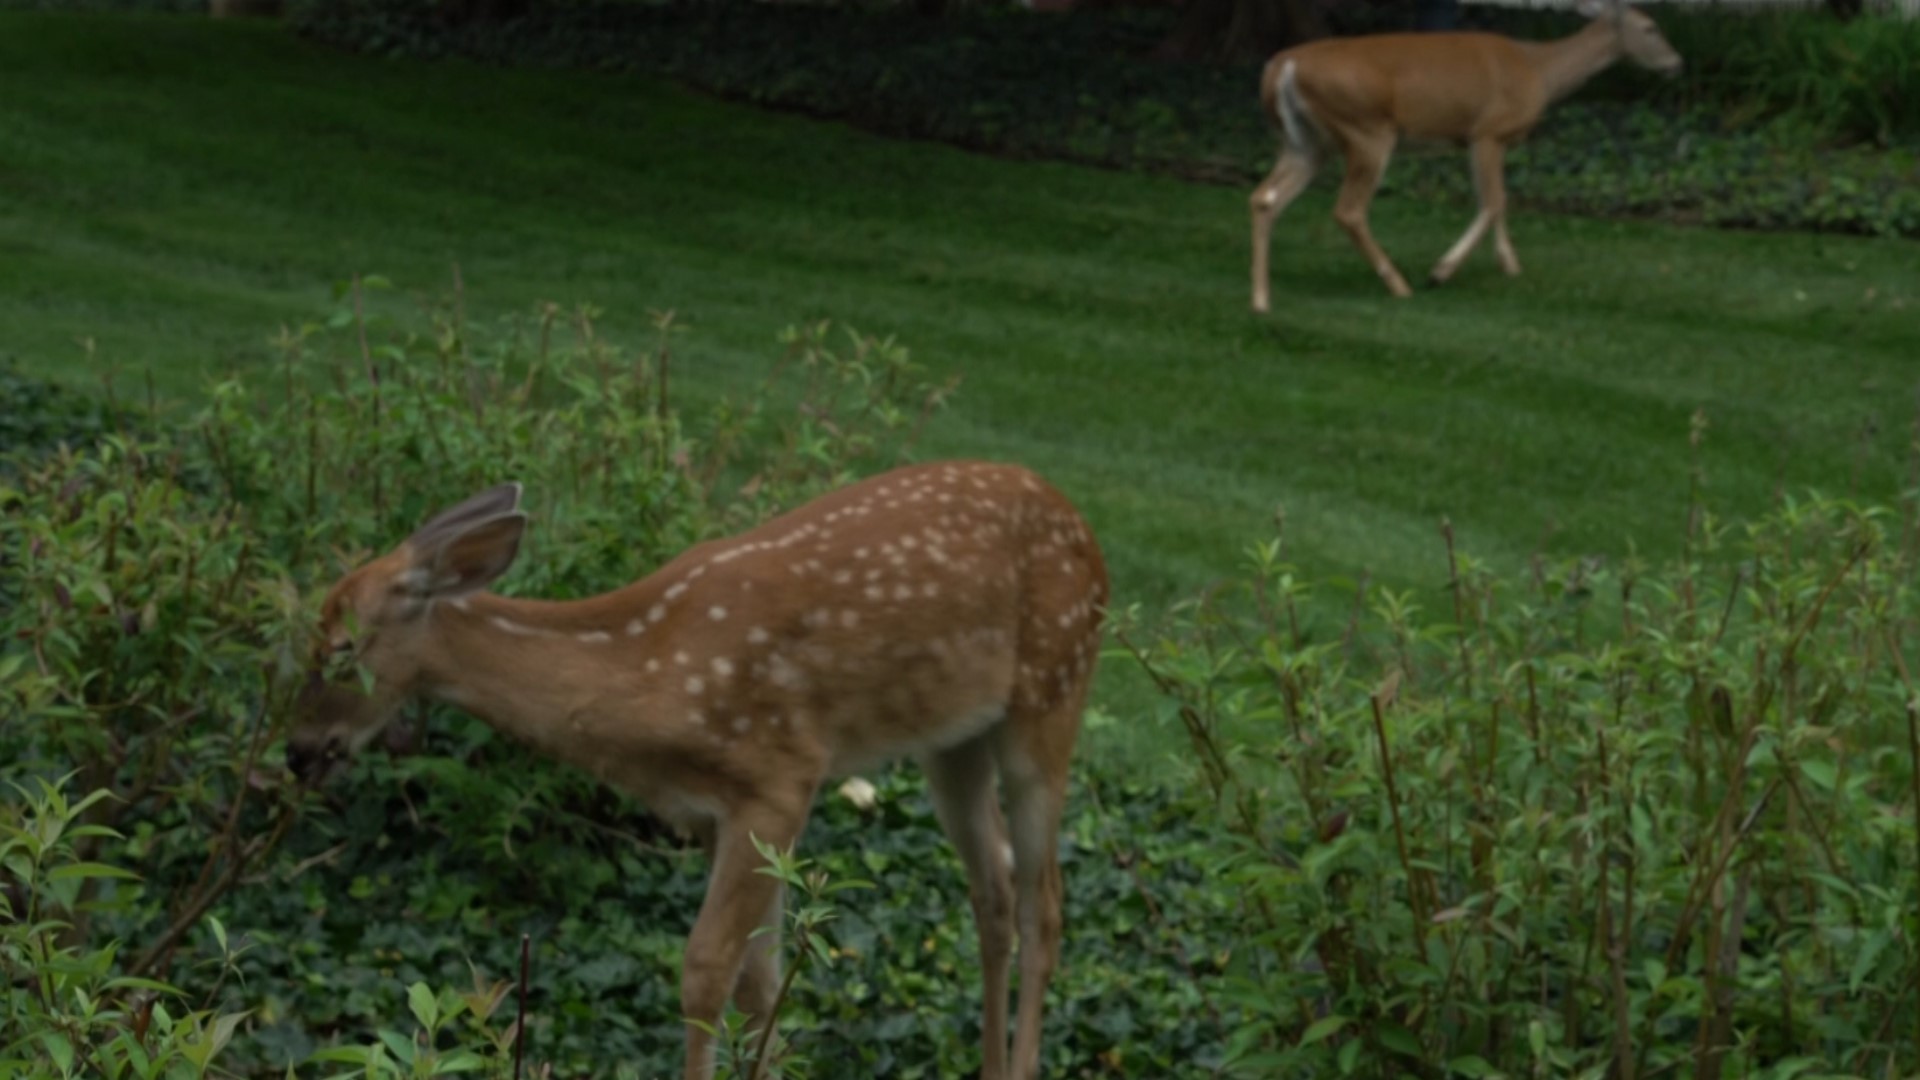 As they were discussing loneliness during a walk outside, Dr. Acton and Dr. Anderson saw a fawn and her doe up close.